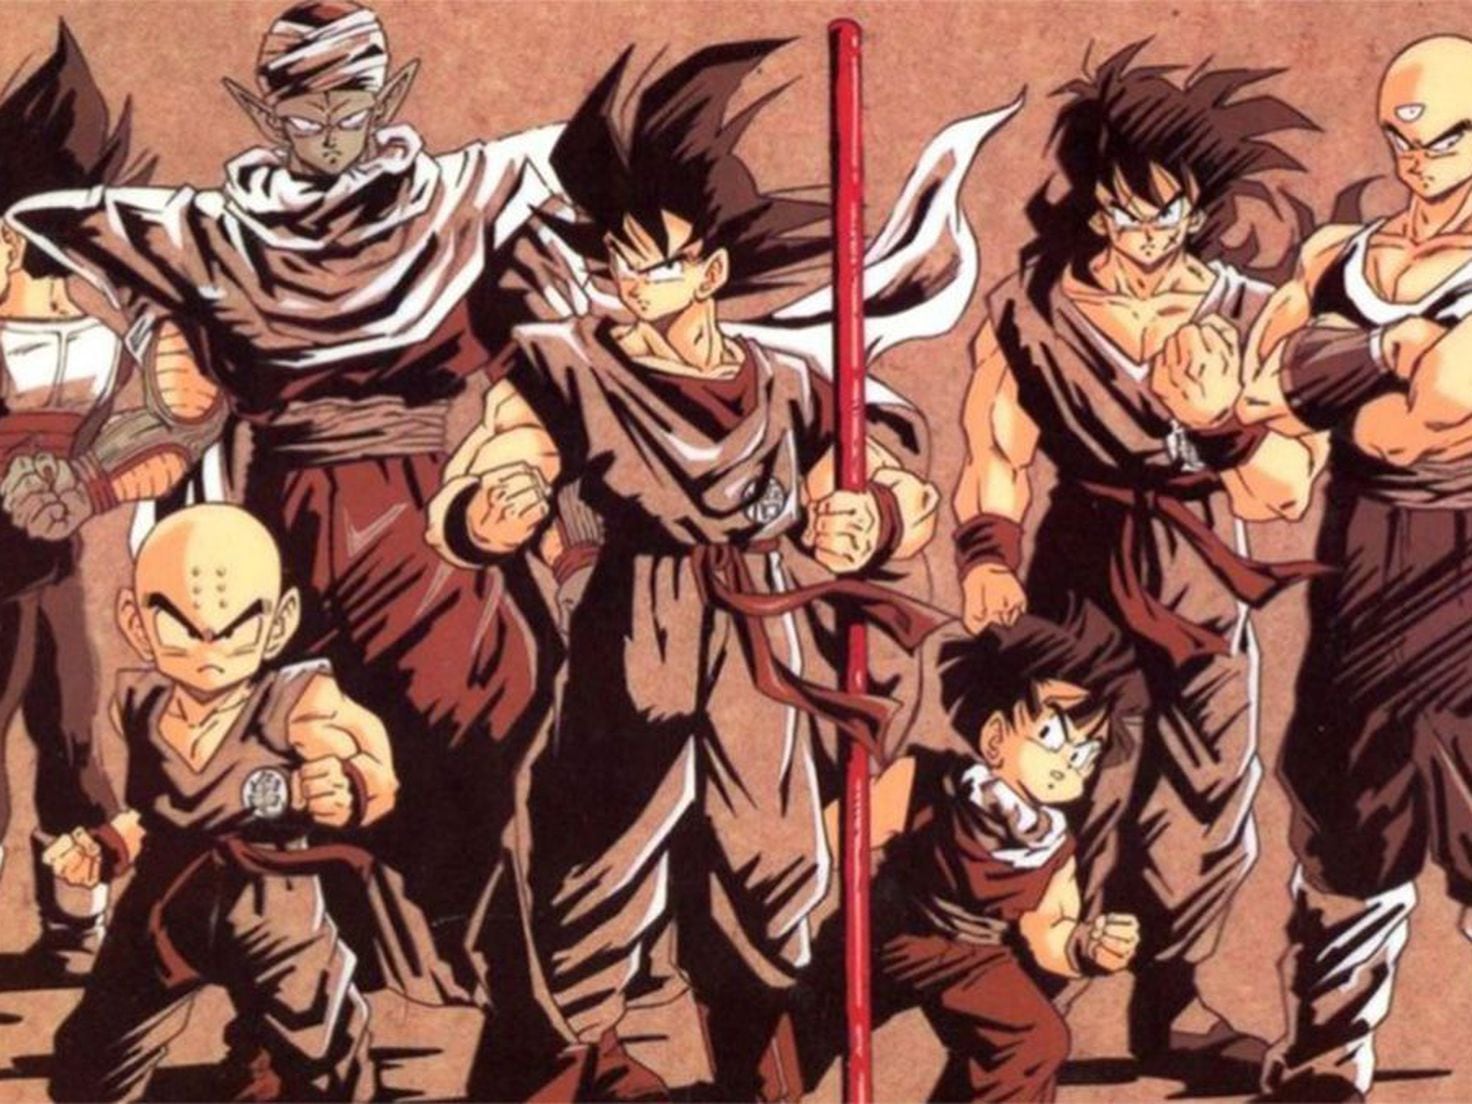 Watch Dragon Ball Z Movies and Dragon Ball Super Movies on